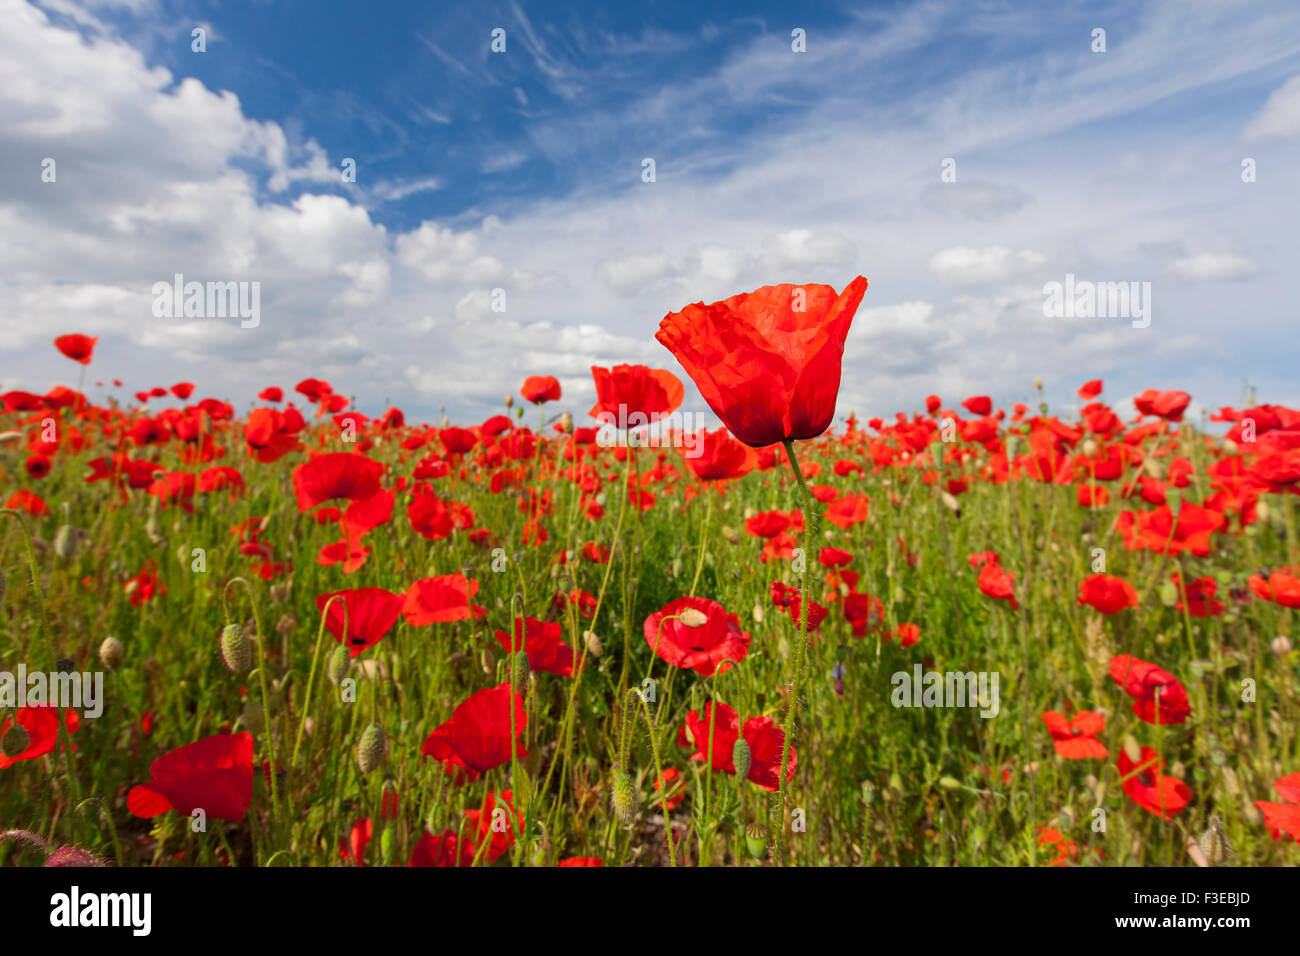 Common poppies / red poppy (Papaver rhoeas) flowering in field in summer Stock Photo